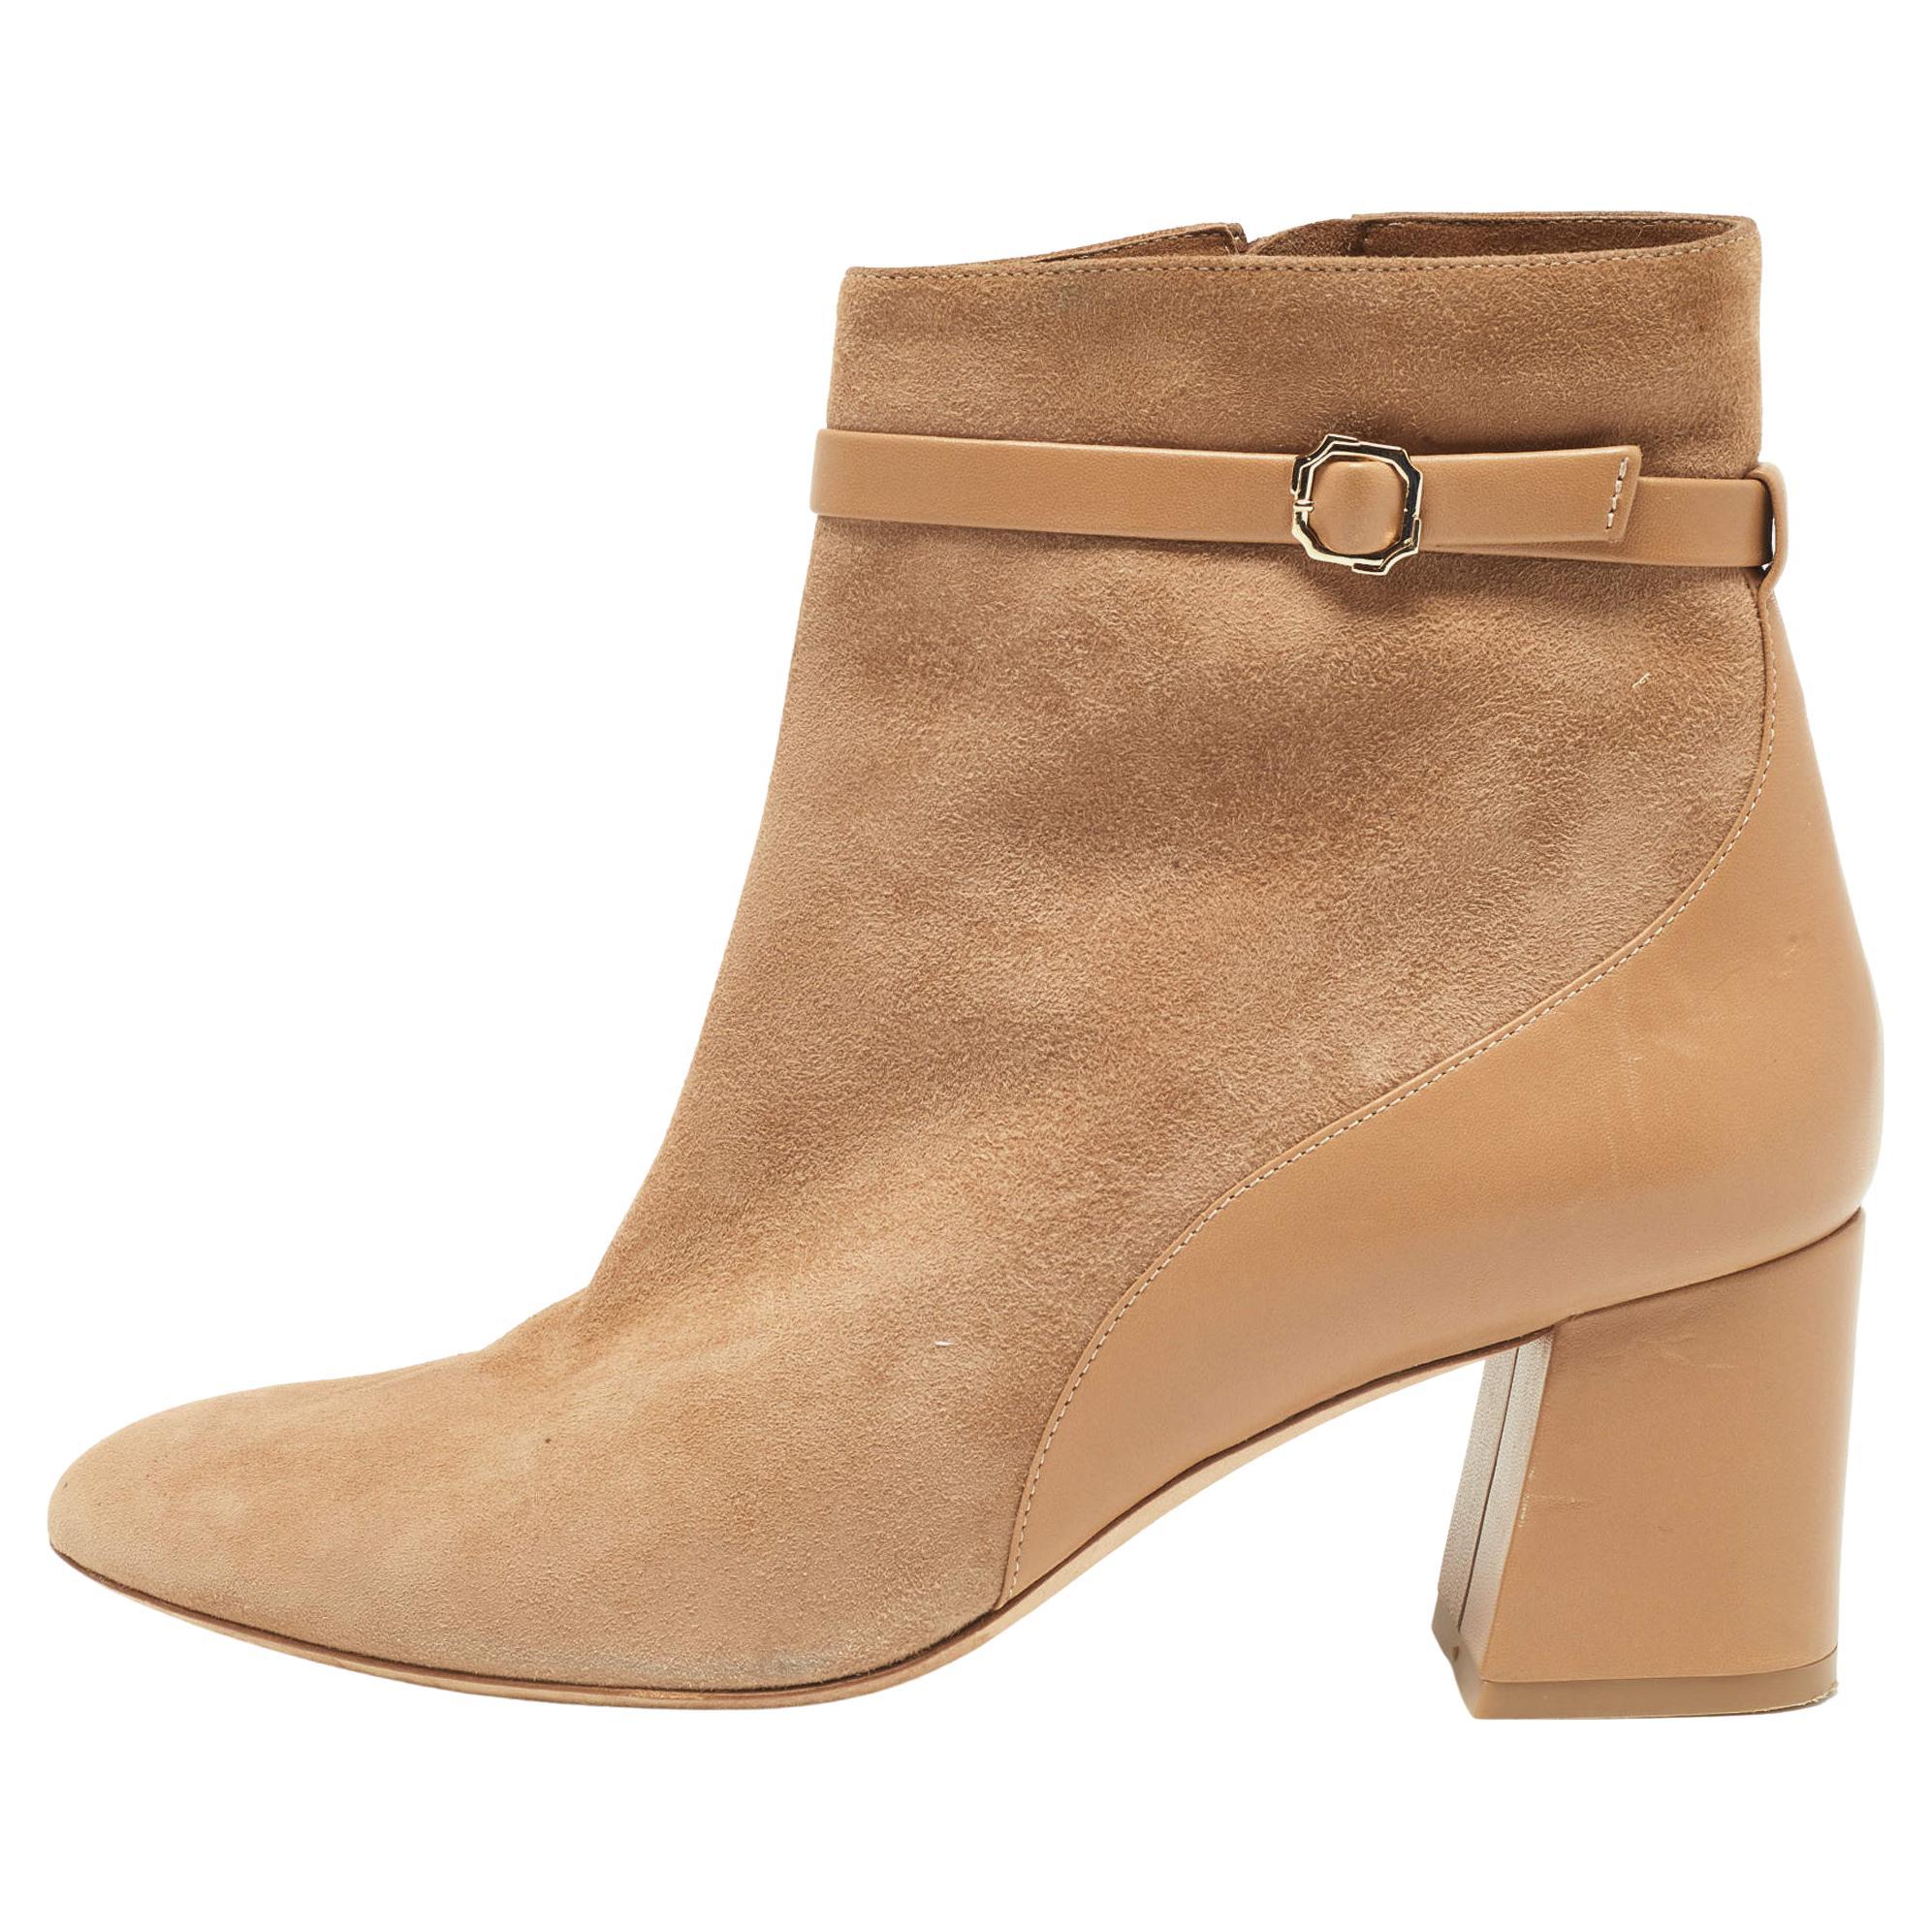 Malone Souliers Beige Suede and Leather Ankle Boots Size 39 For Sale